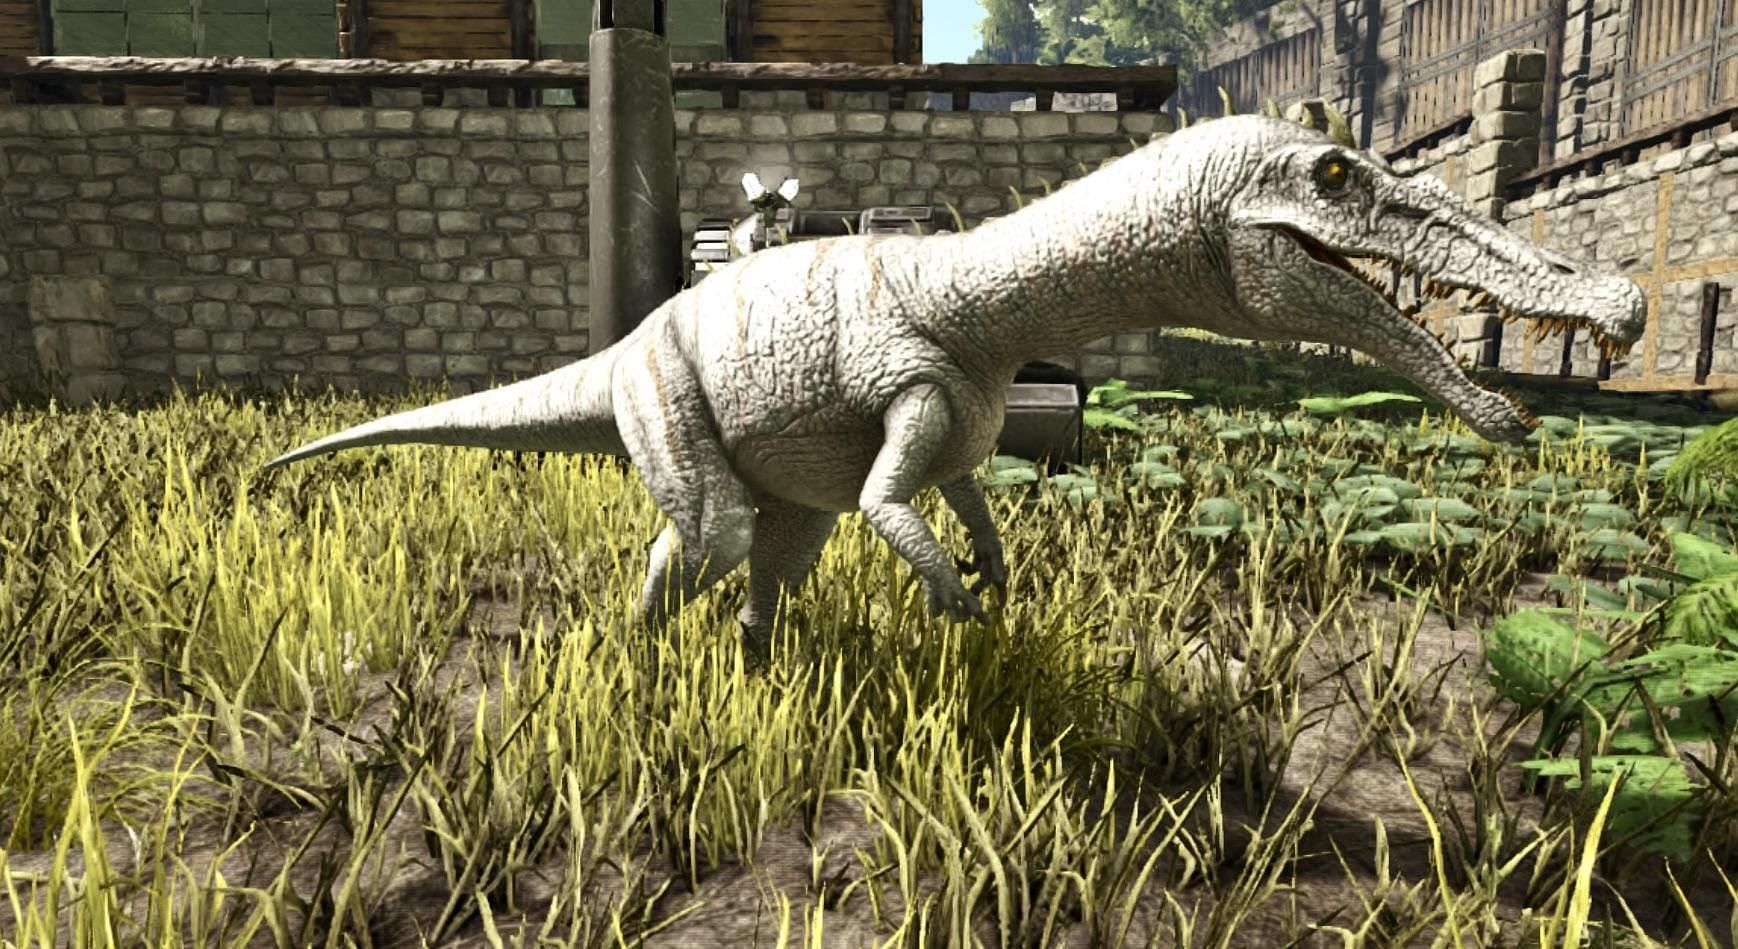 Baryonyx can be found near bodies of water in ARK Survival Ascended (Image via Studio Wildcard)